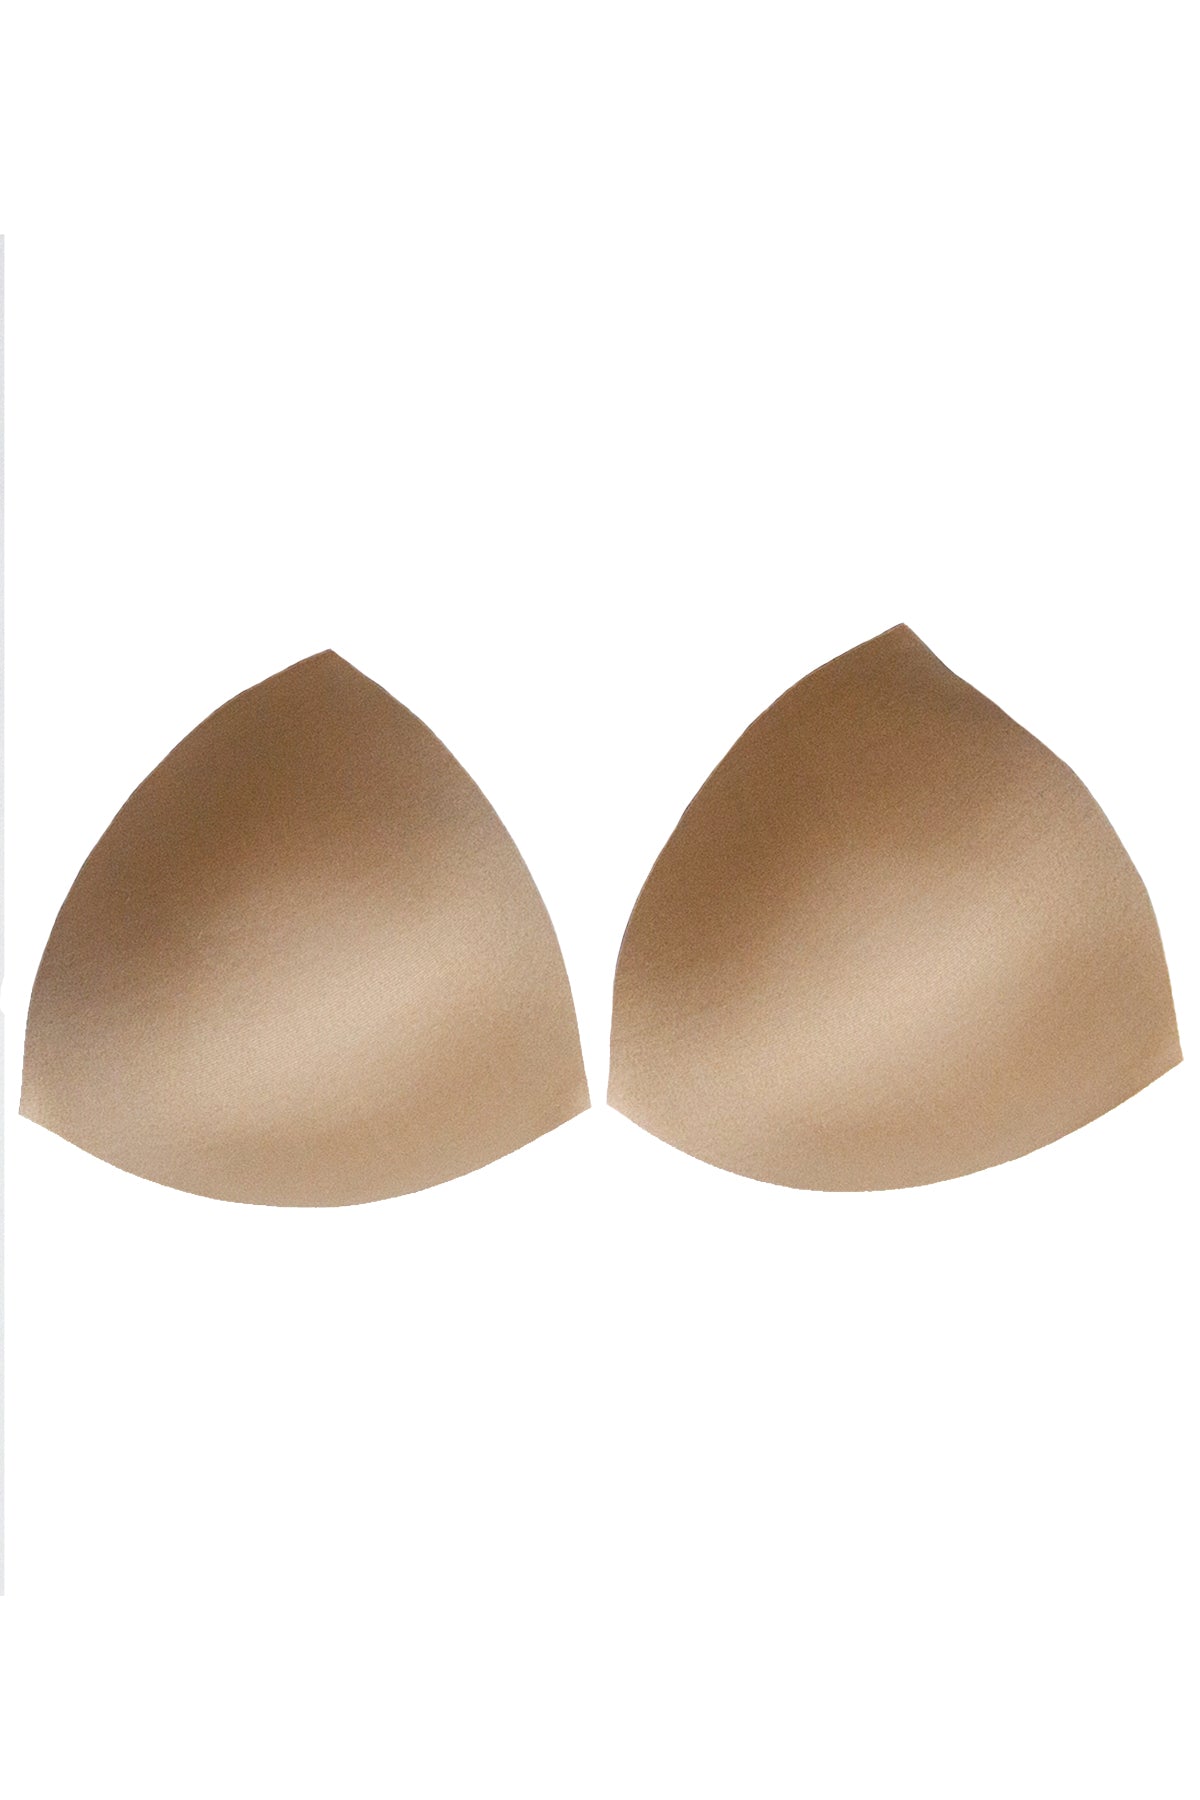 Double Scoop® Large Bra Inserts with Bonus Pack of Palestine